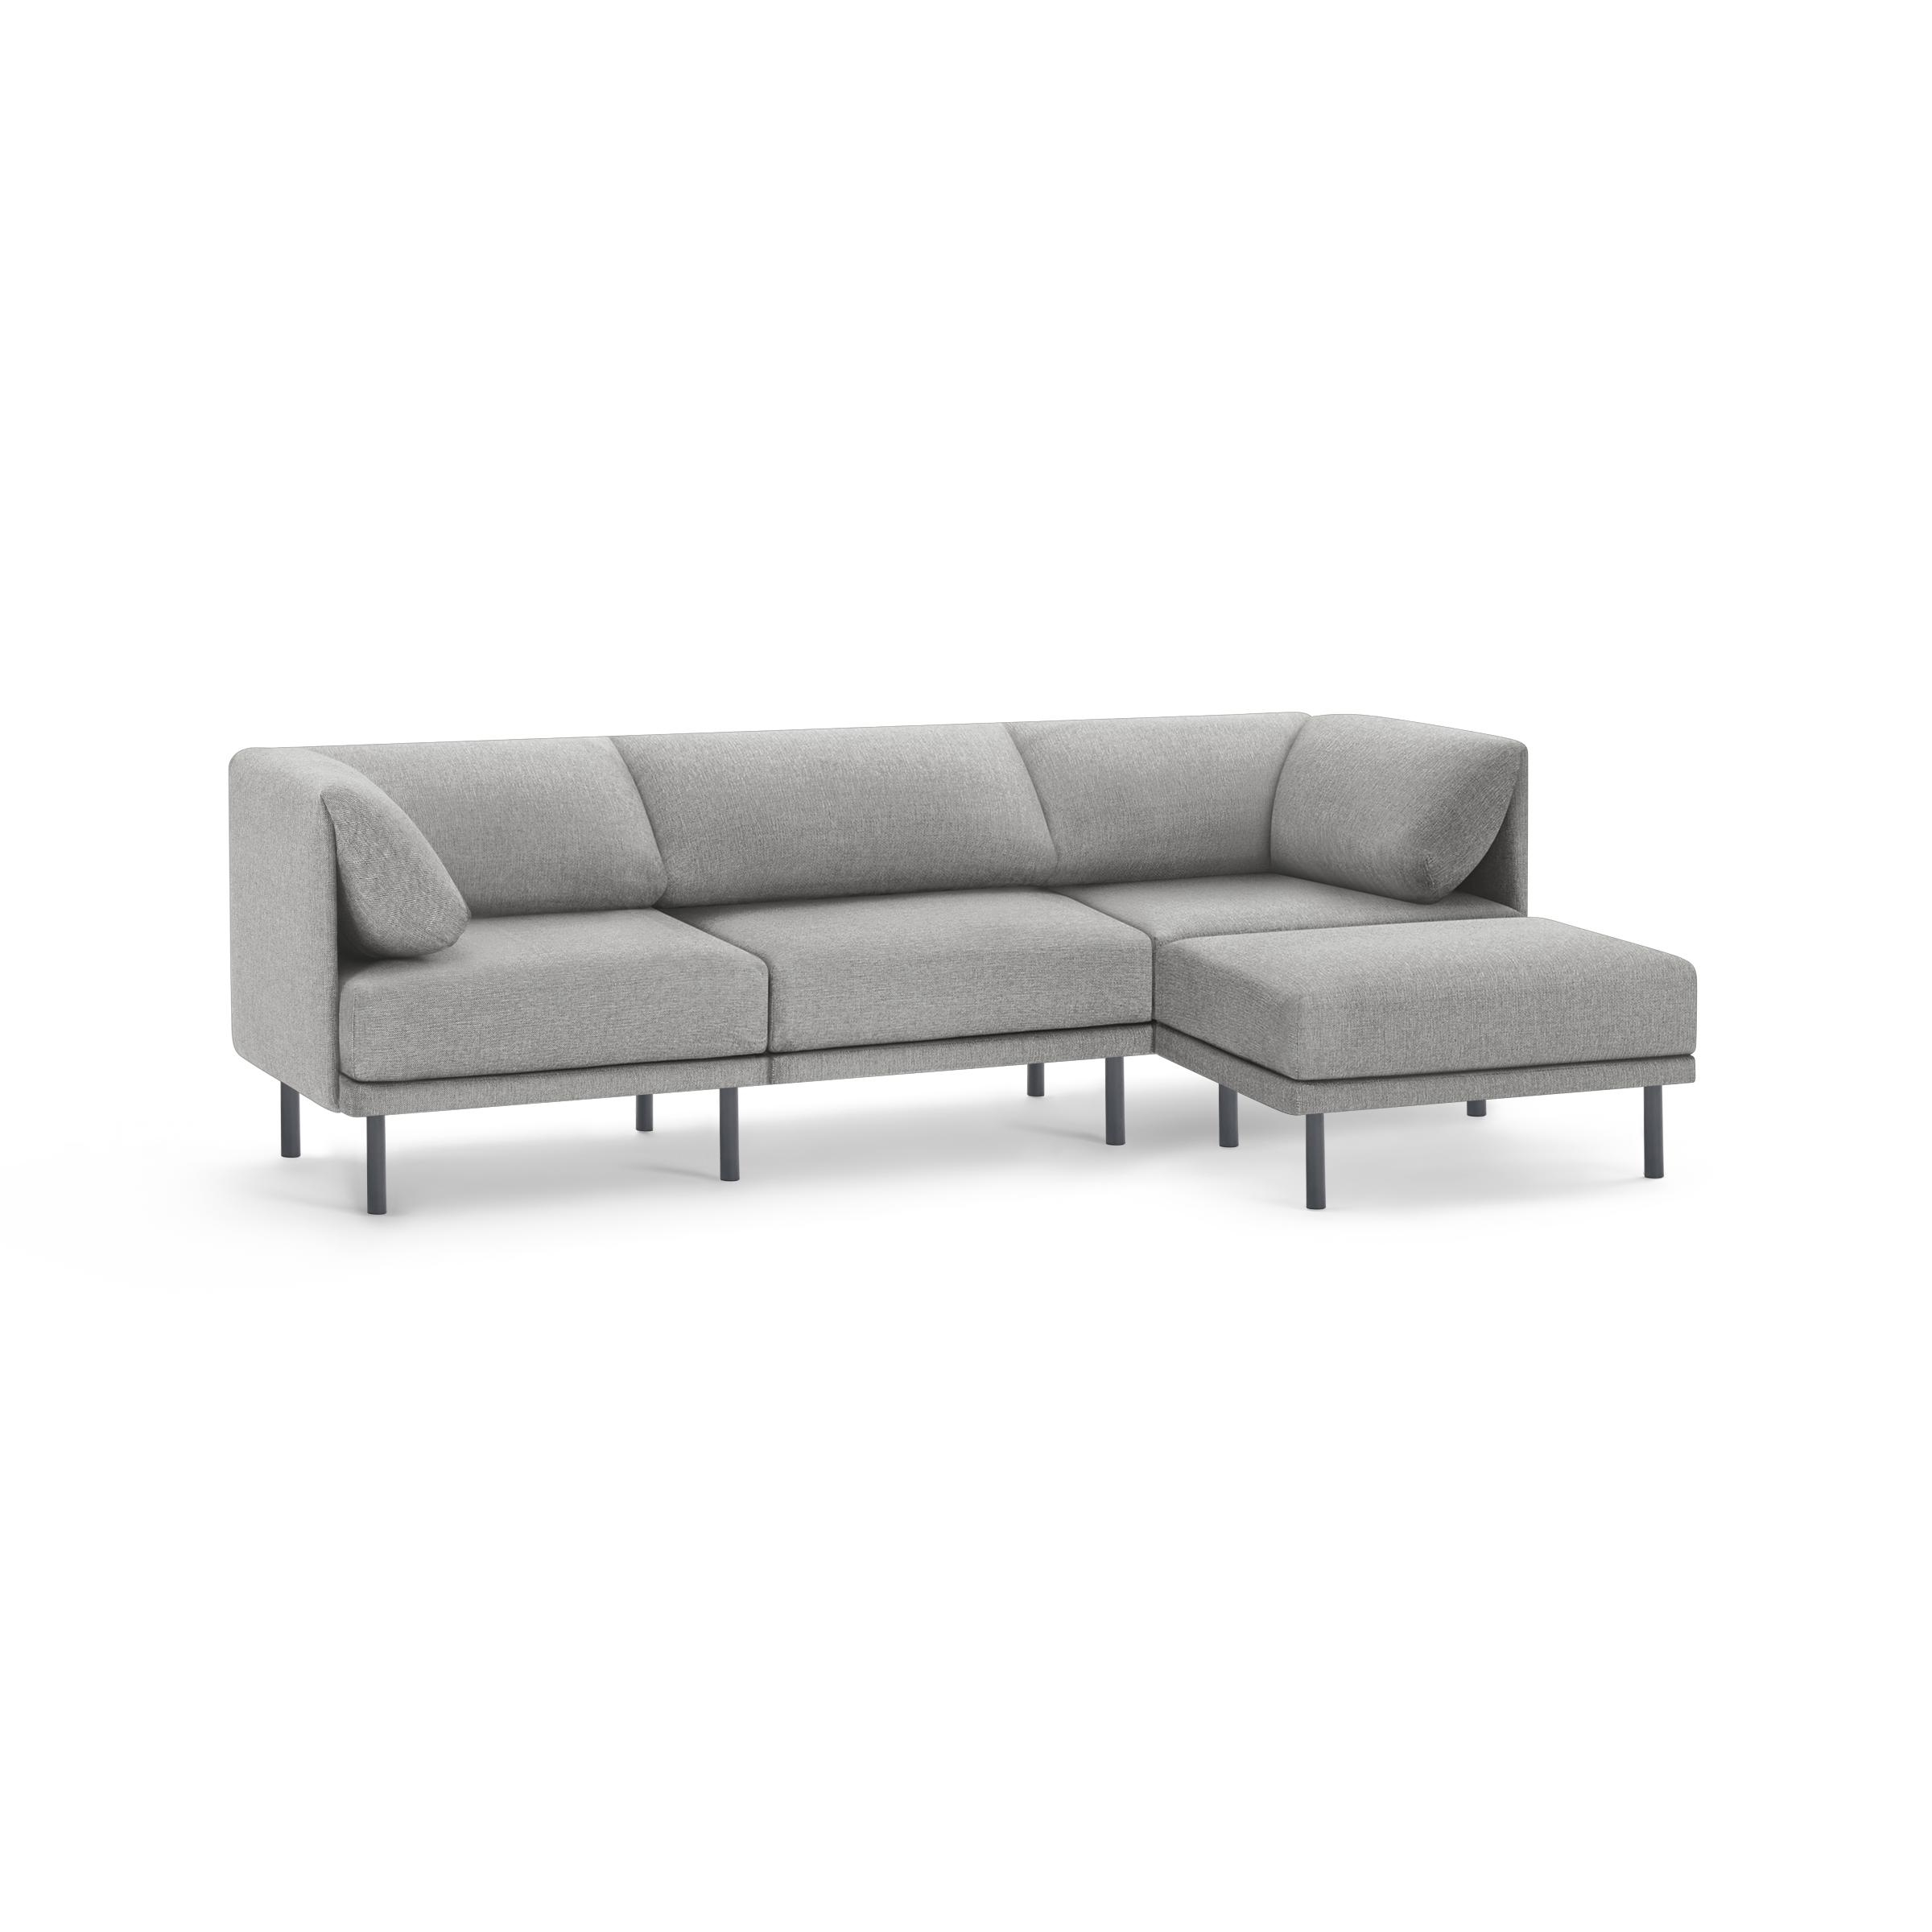 The Range 4-Piece Sectional Lounger in Stone Gray - Image 1